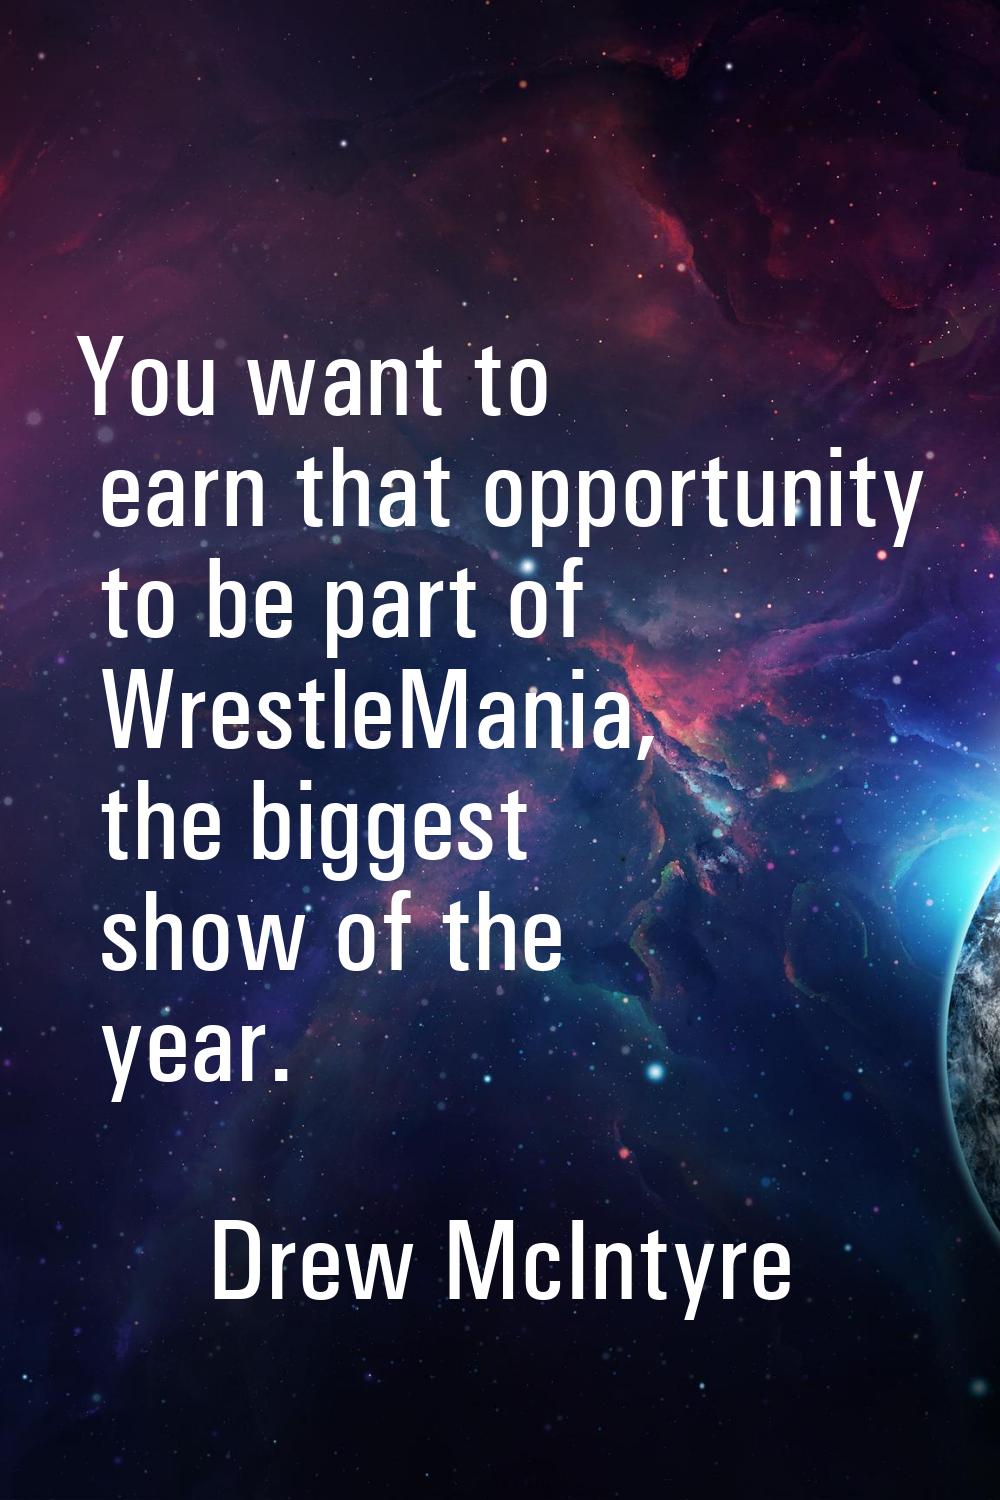 You want to earn that opportunity to be part of WrestleMania, the biggest show of the year.